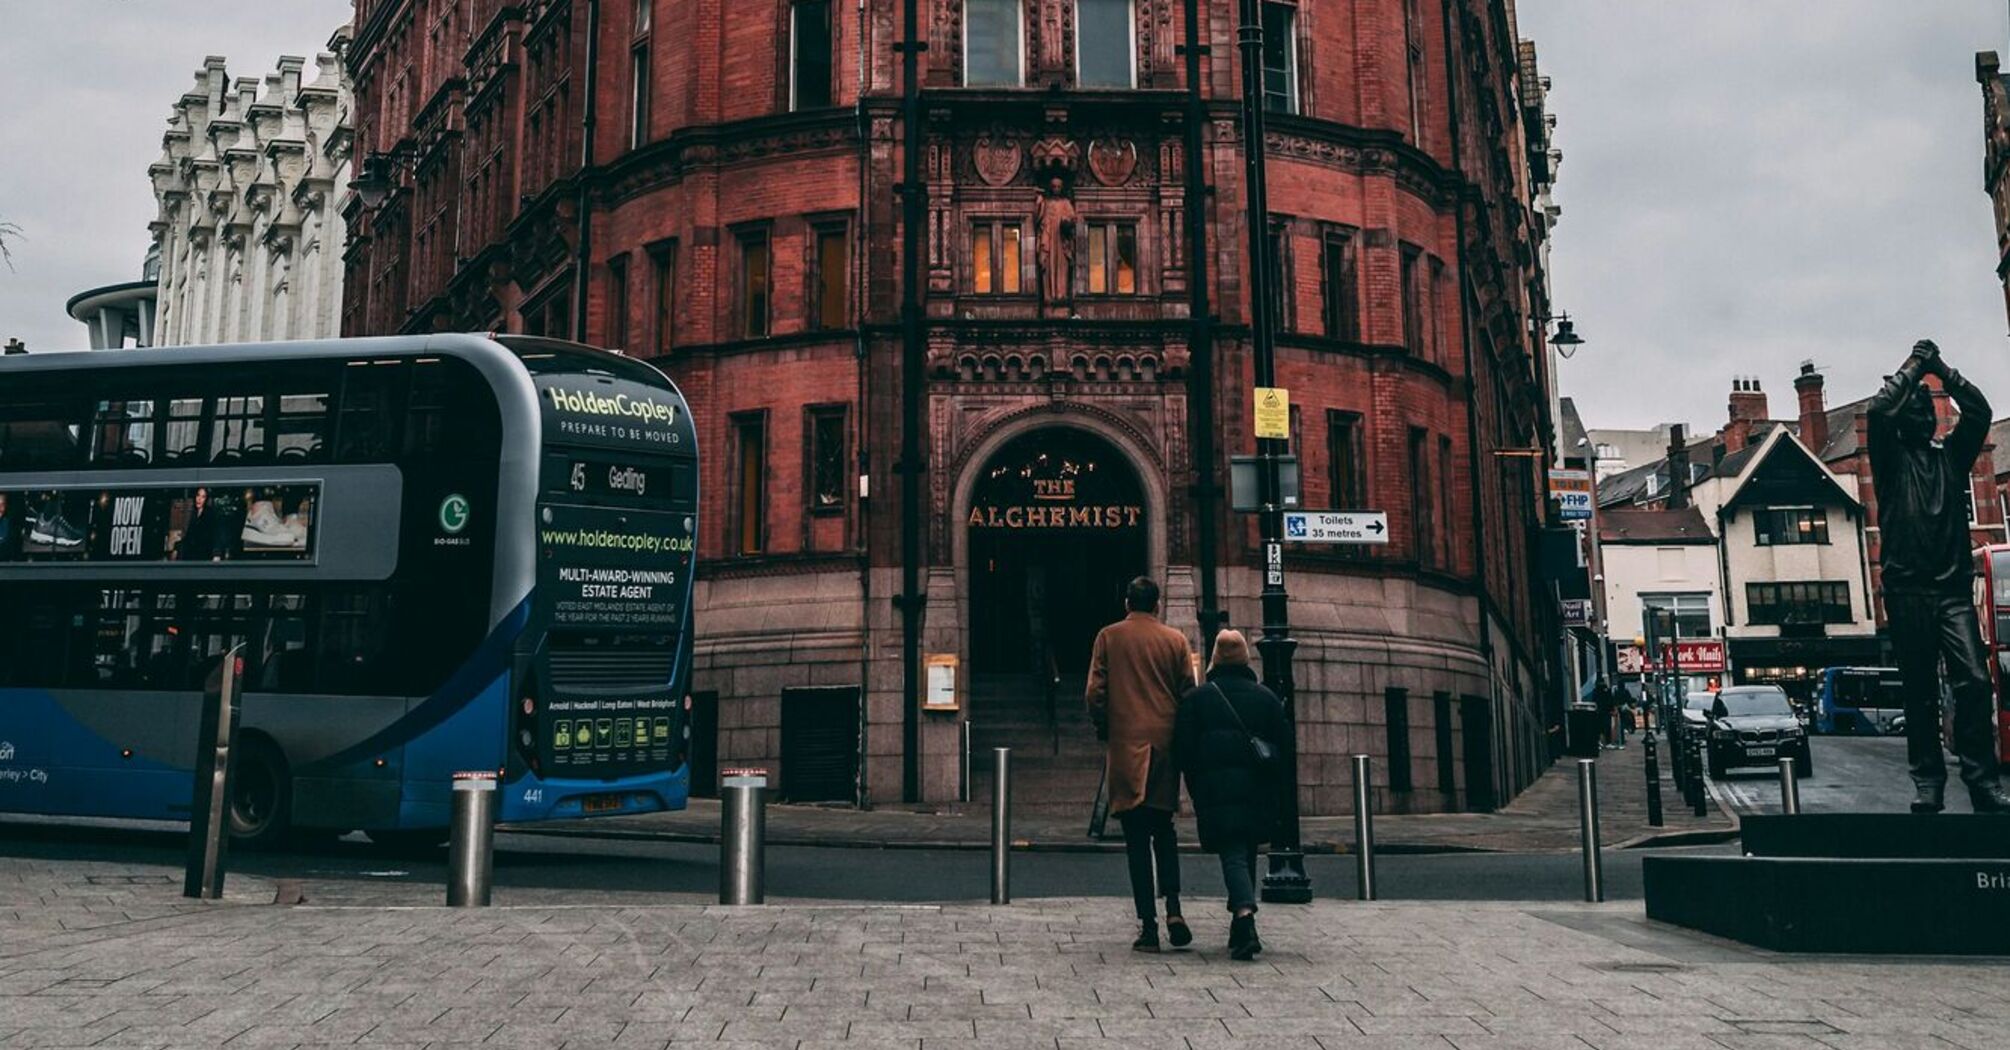 An old, red brick building in Nottingham with a bus and pedestrians in front